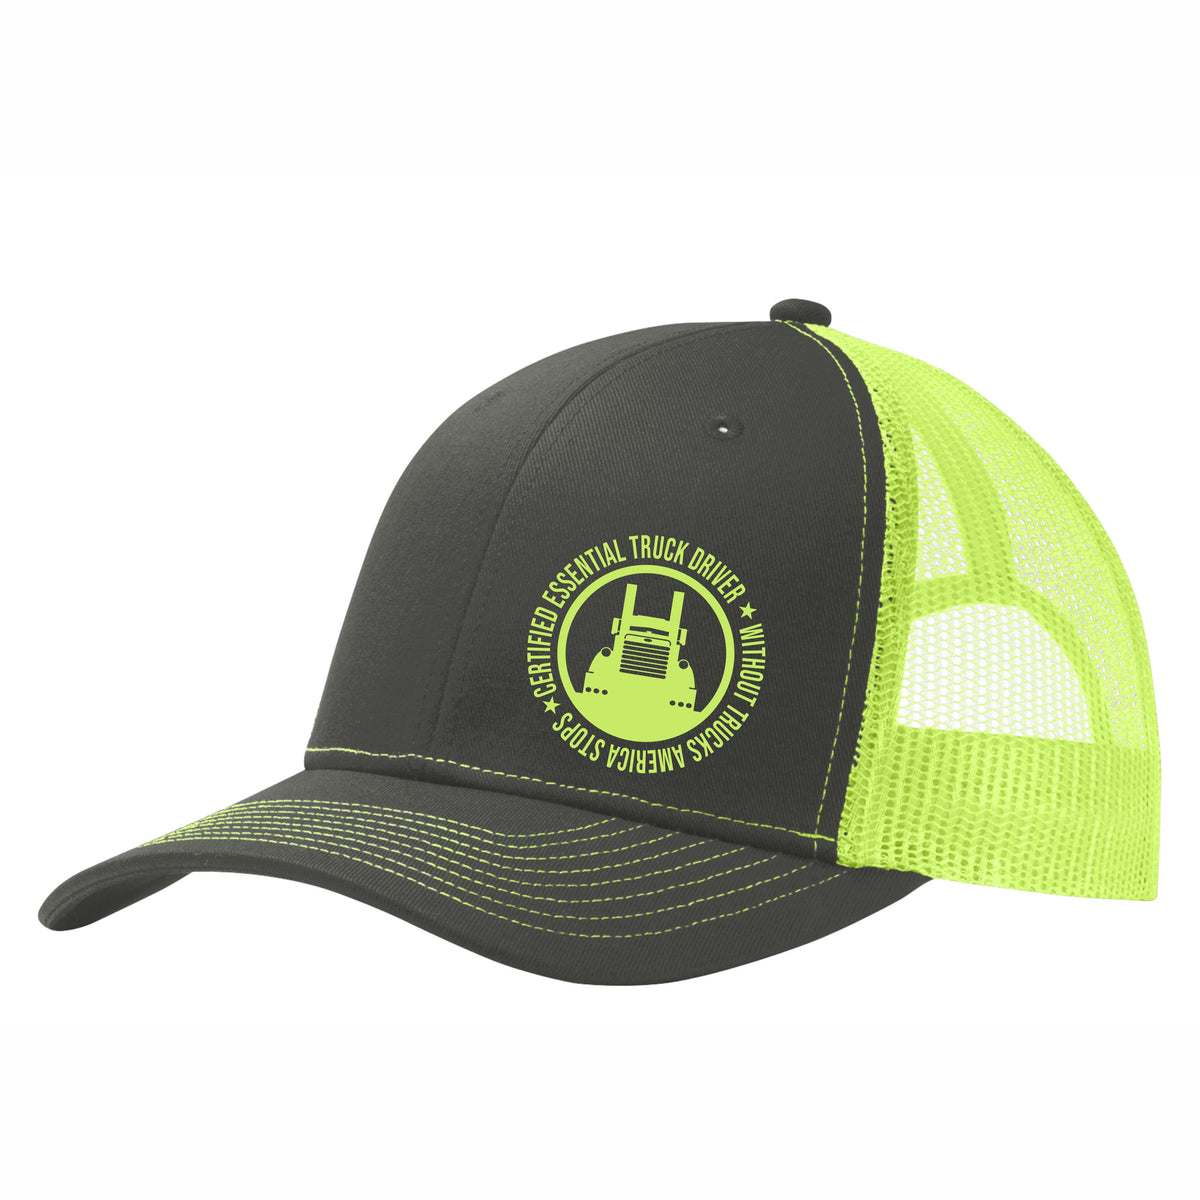 Certified Essential Truck Driver Mesh Back Hat Free Shipping